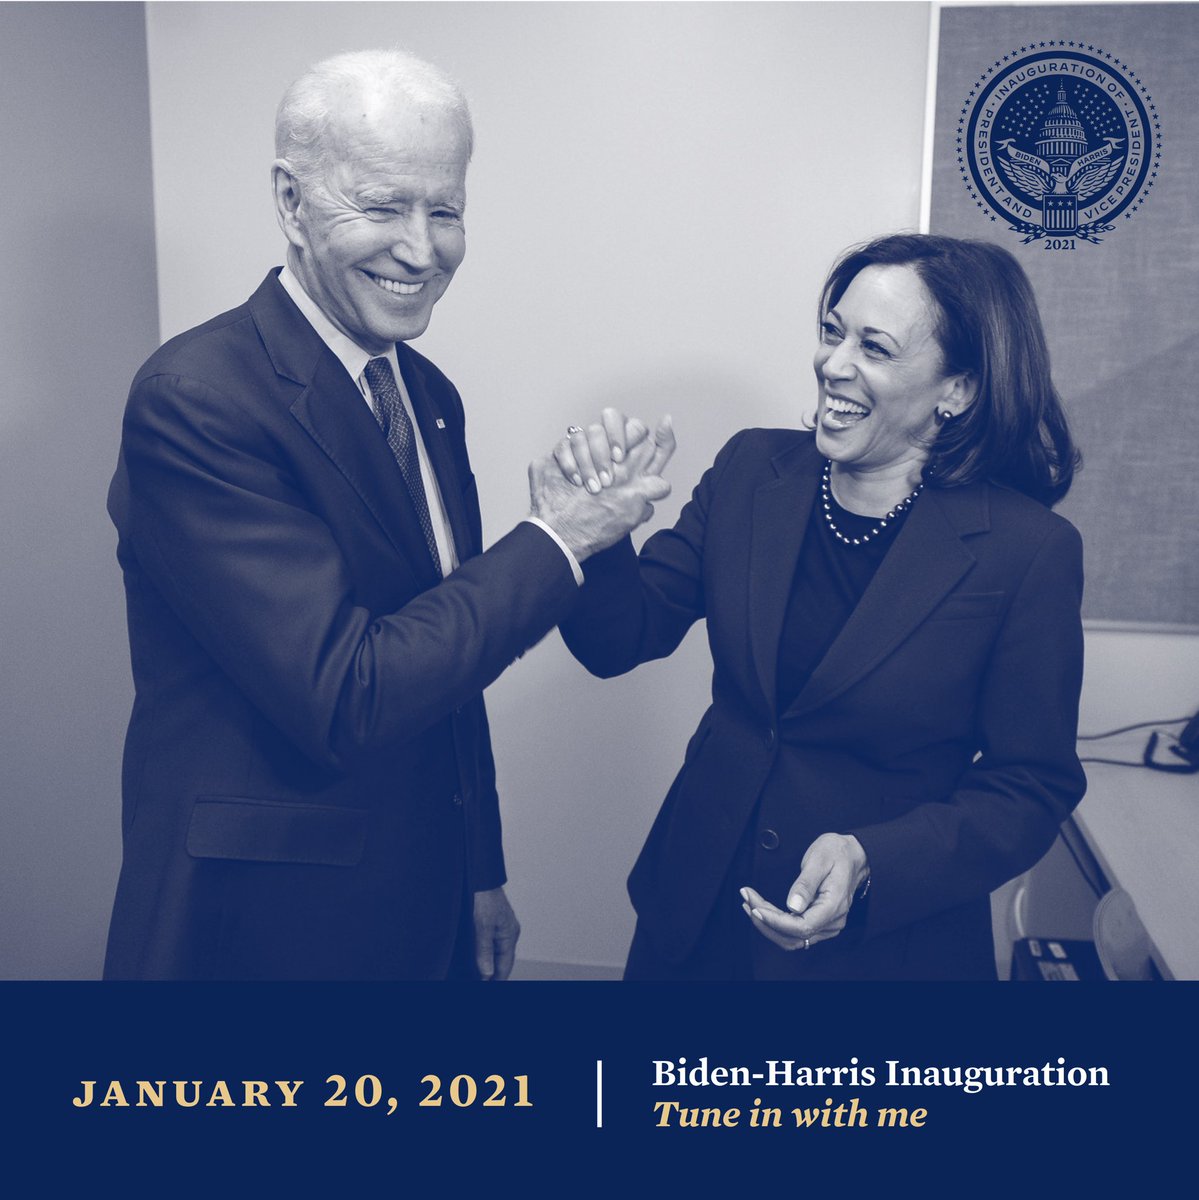 Let’s not forget, the people have already spoken. Spoken with their votes. Not just in big cities, but all across our country. I have faith in  #PresidentBiden &  #VicePresidentHarris, and in all of the hardworking, honest people who work in our Congress and in our Senate.